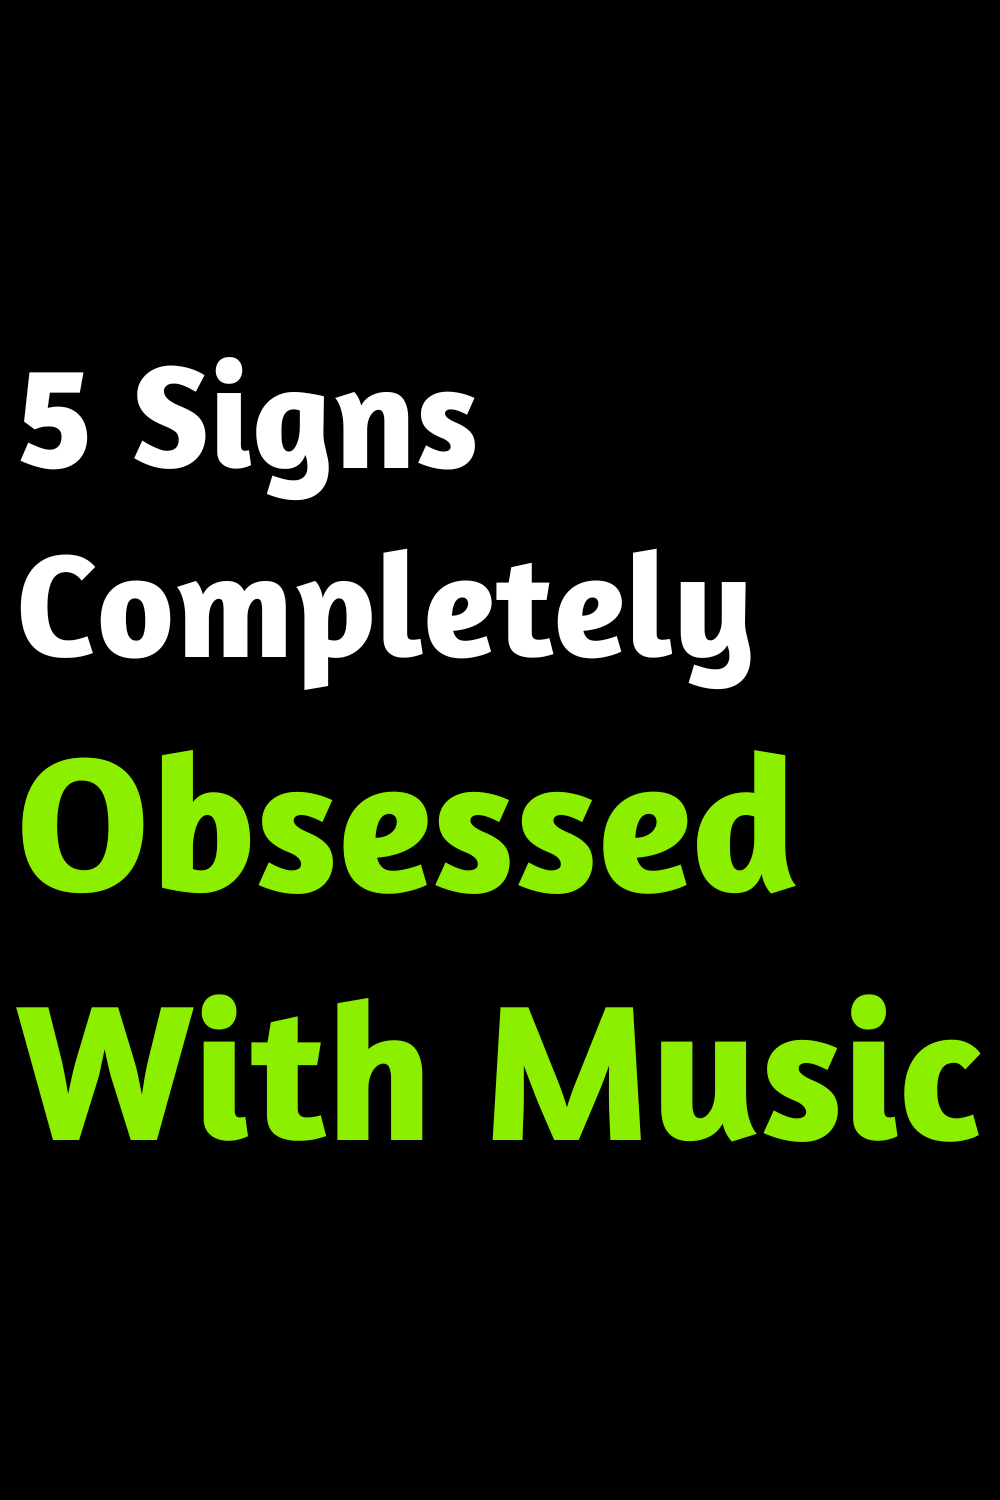 5 Signs Completely Obsessed With Music